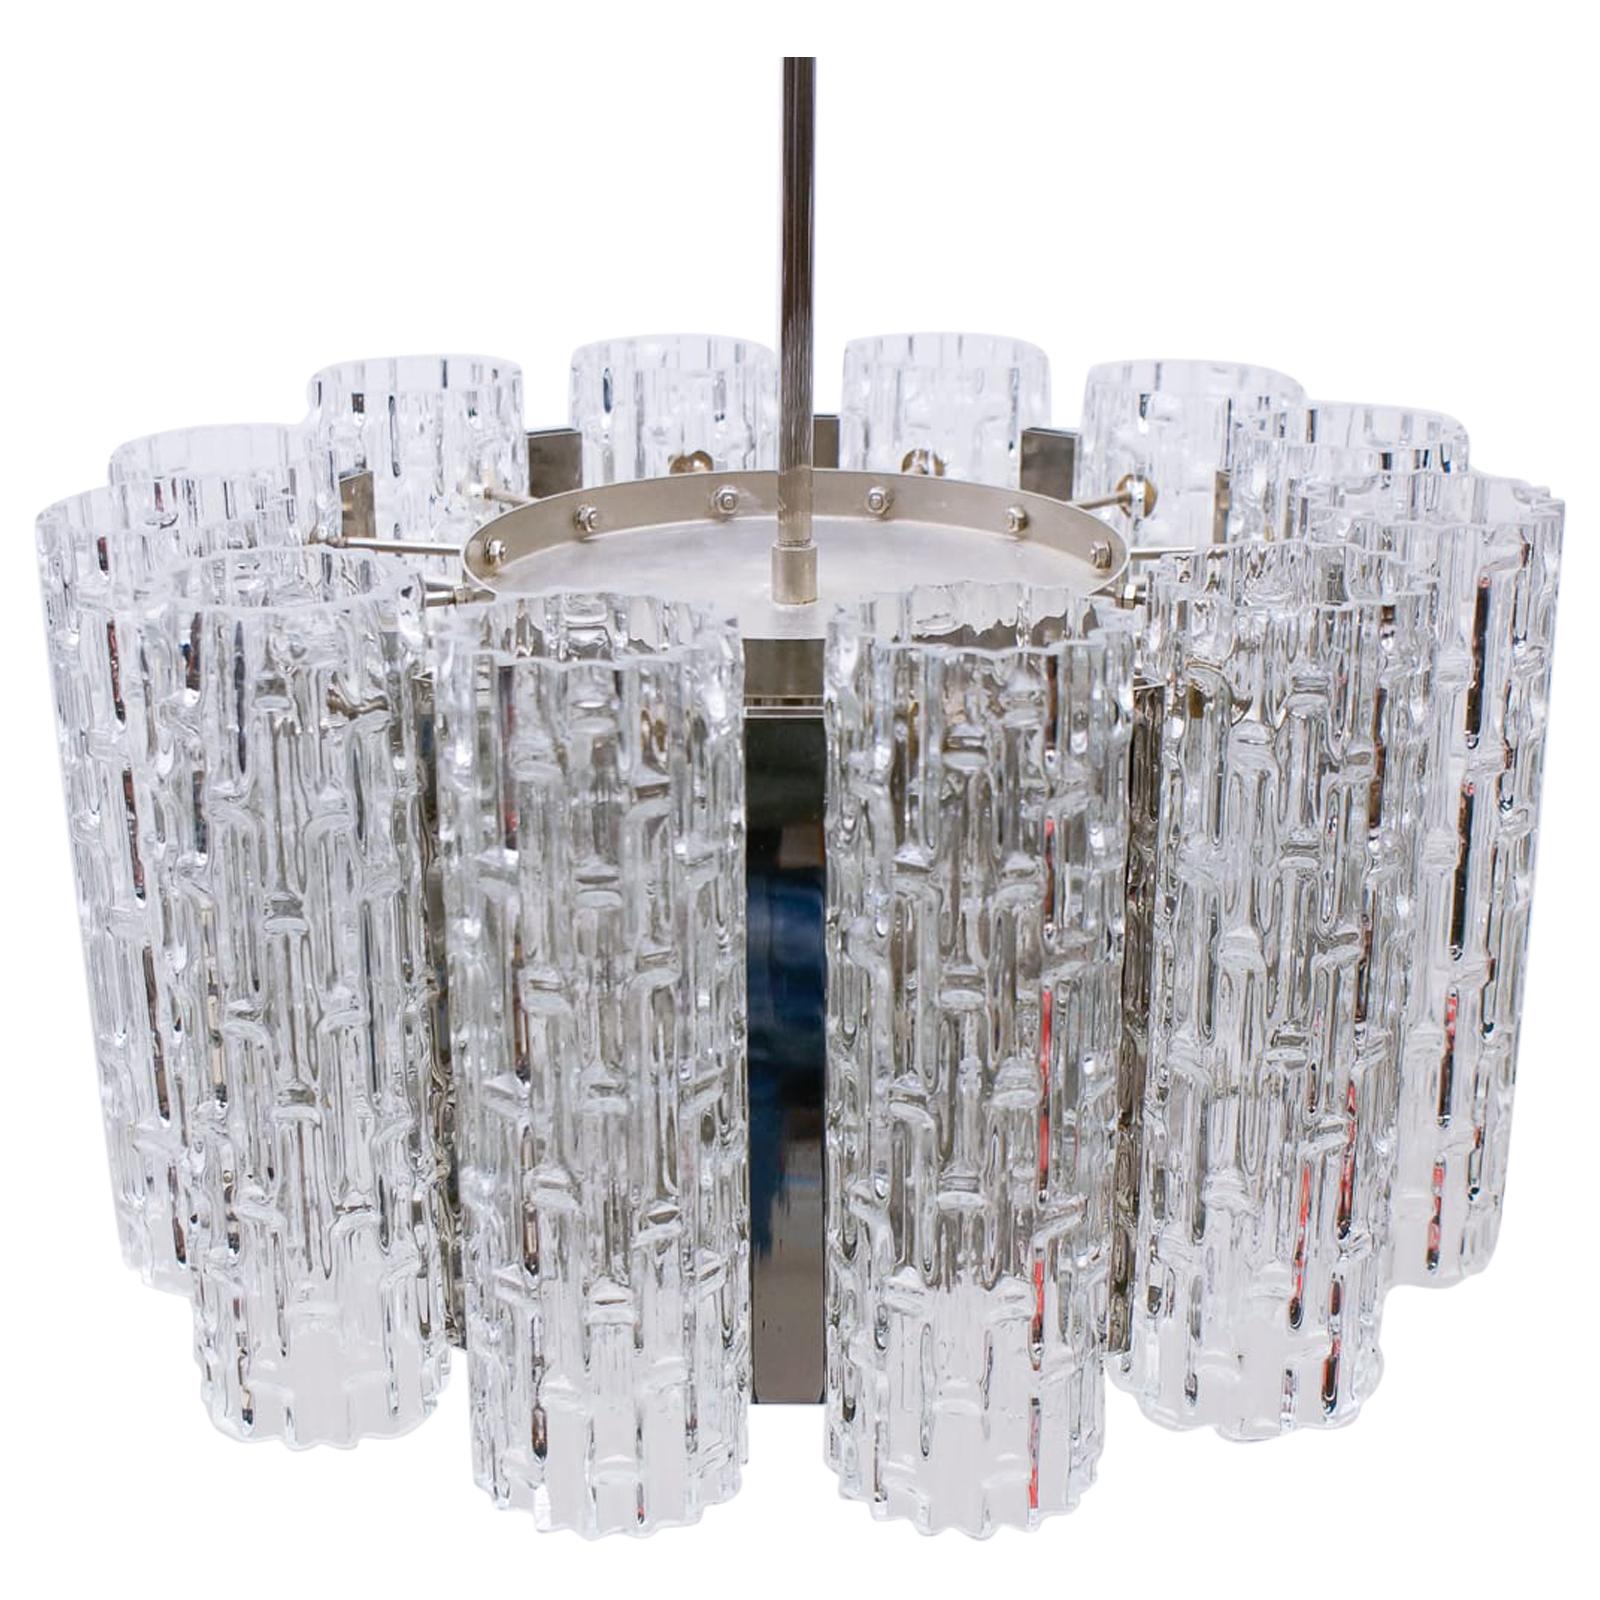 Ceiling Lamp with 12 Textured Glass Shades, Kaiser Leuchten Germany, 1960s For Sale